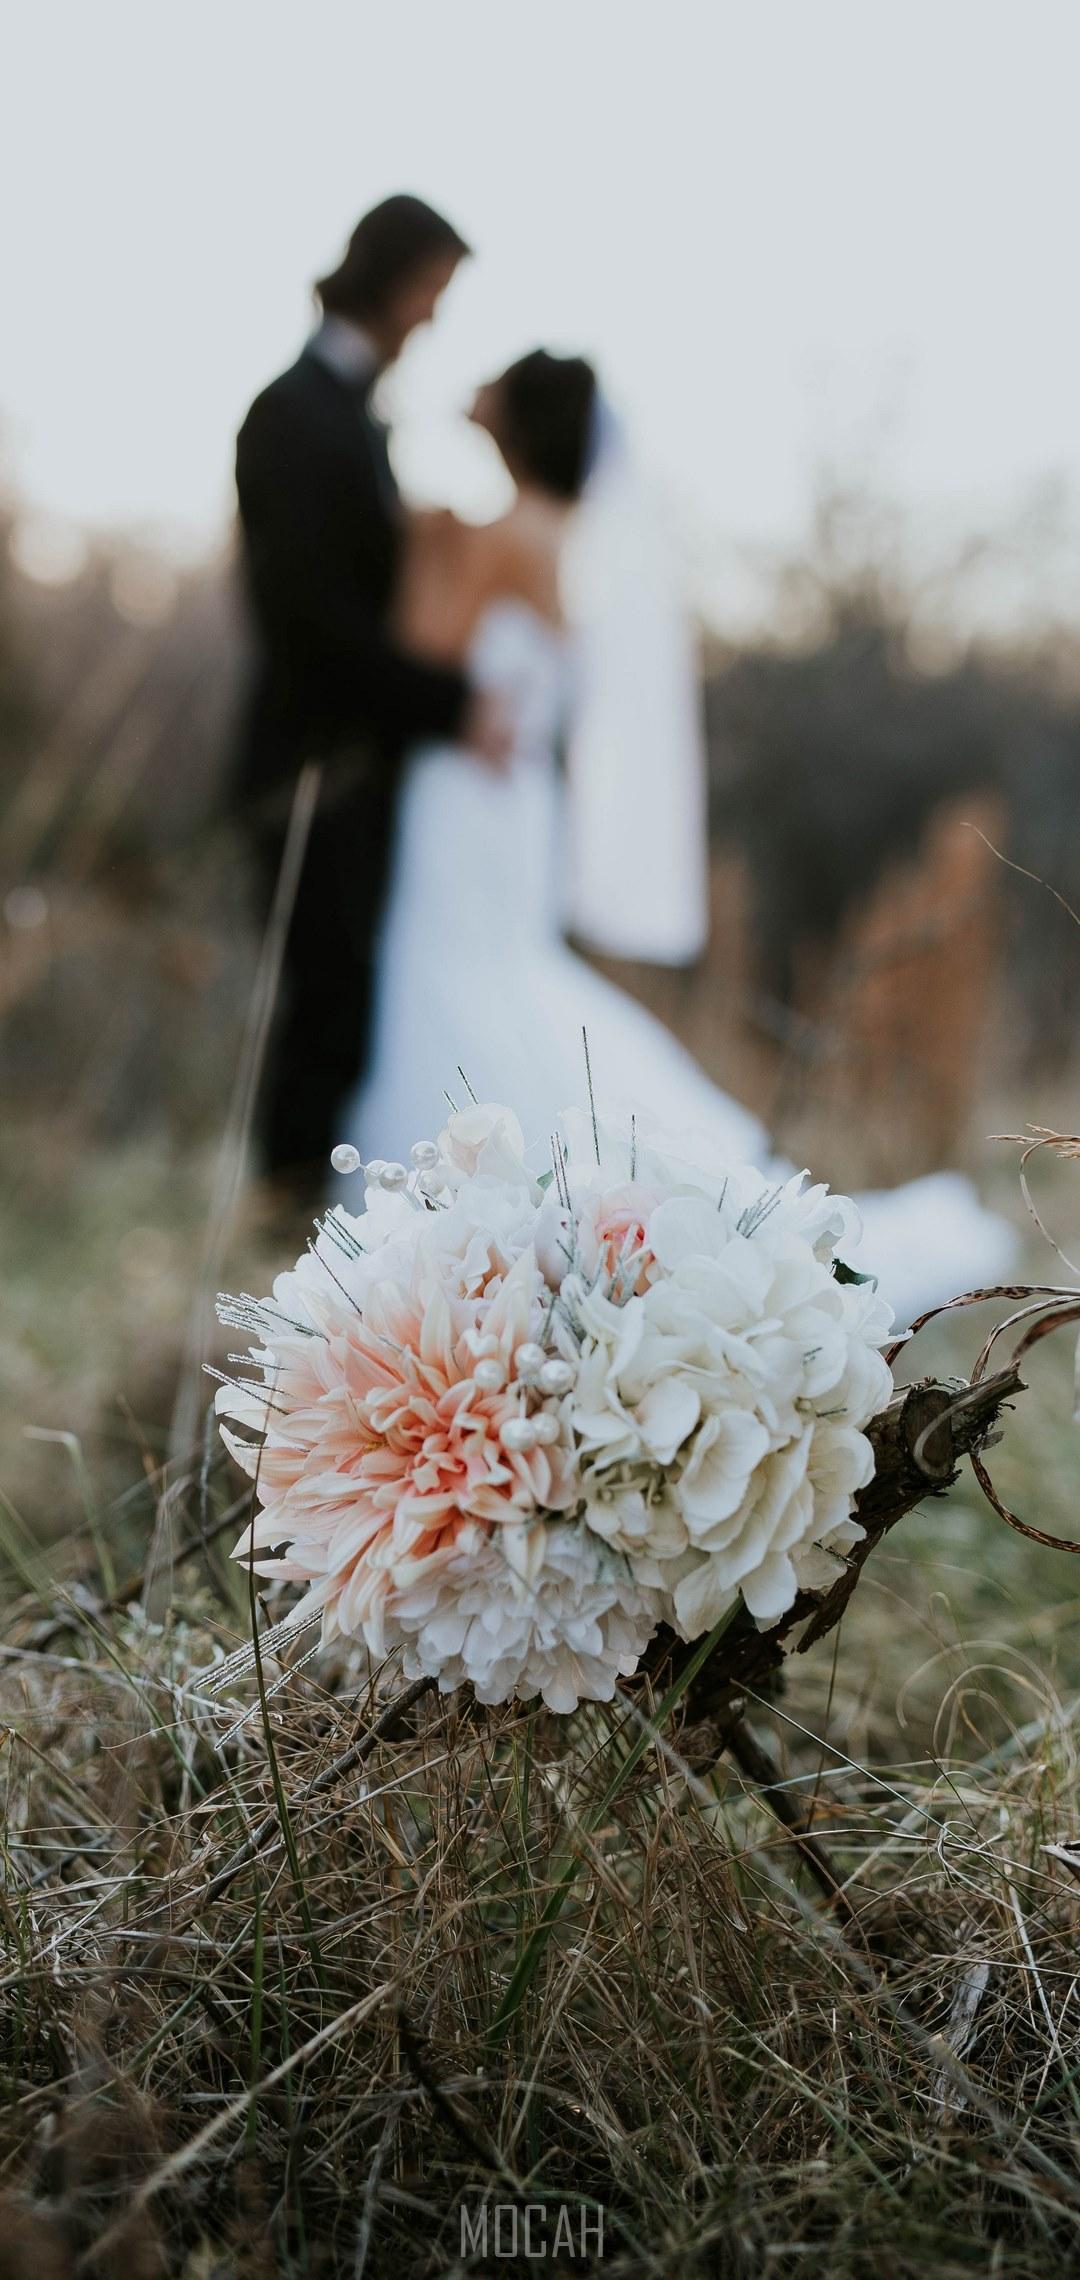 HD wallpaper, A Bouquet Sits In Tall Grass While A Married Couple Embraces In The Fuzzy Background, Wedding Evening, 1080X2280, Huawei P20 Lite Background Hd